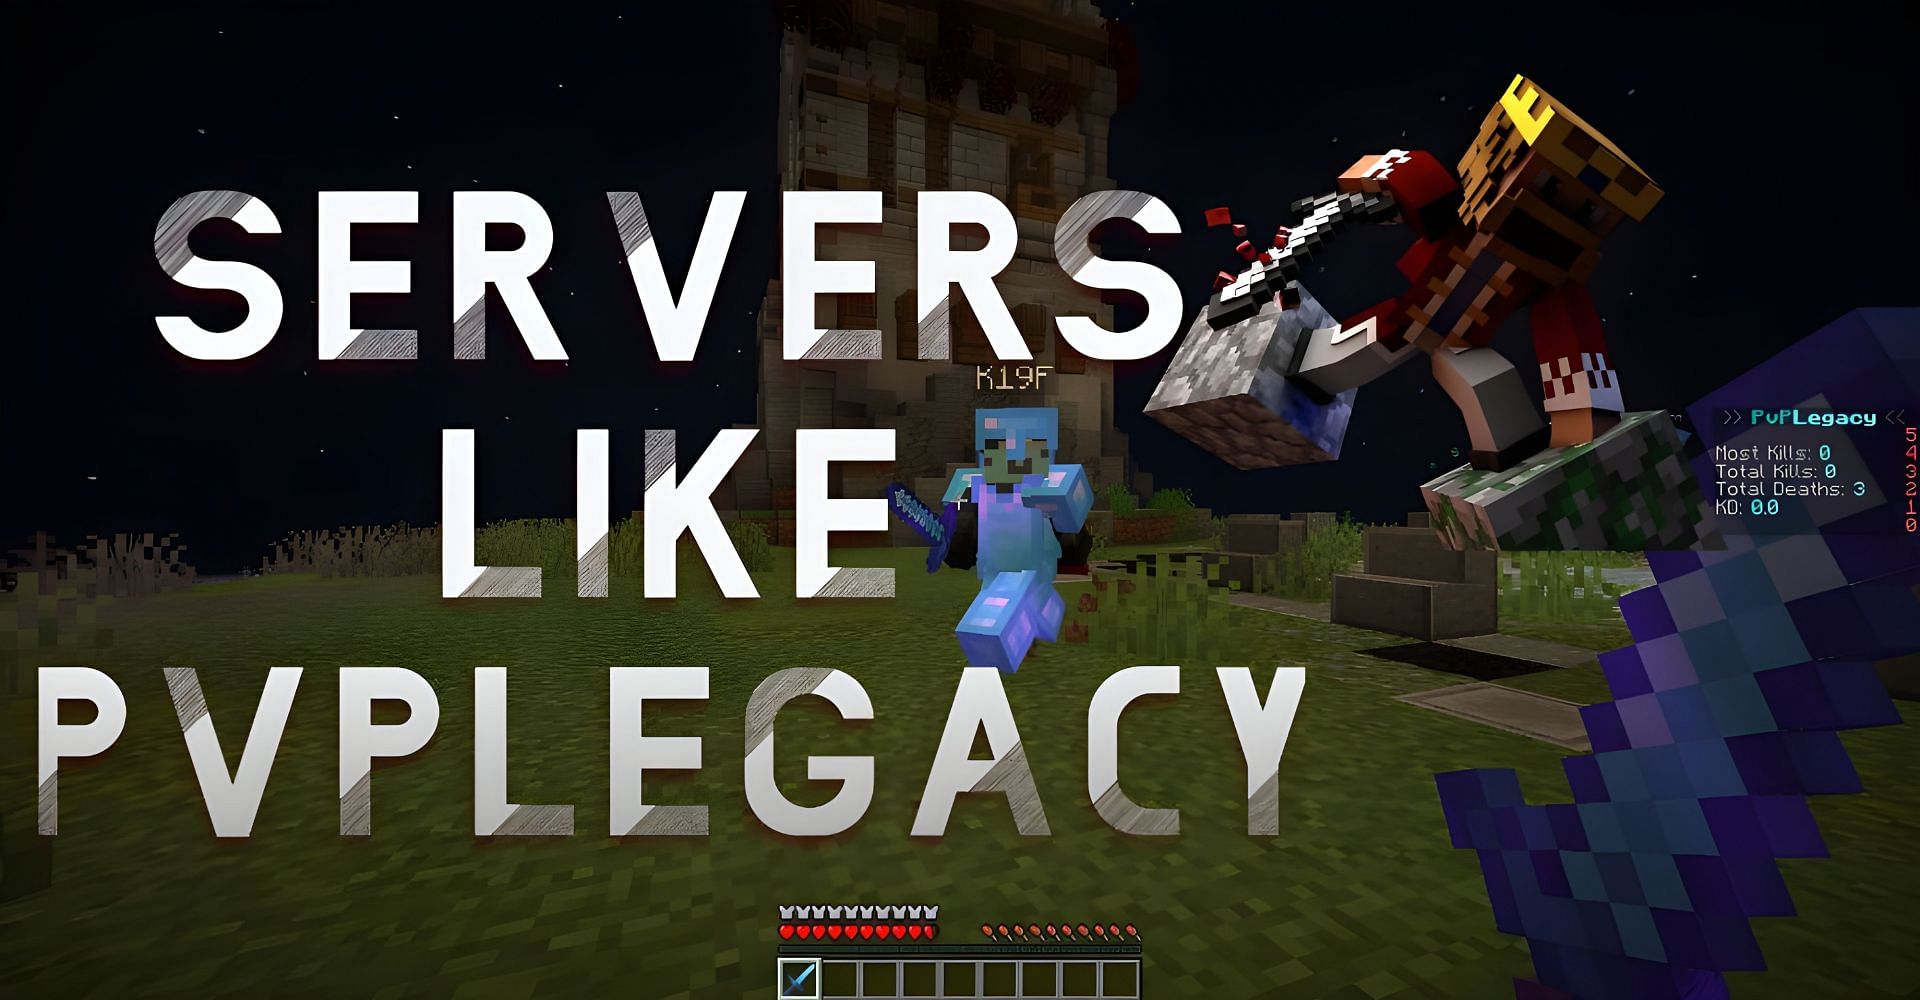 PvPLegacy is a great server but there are many other fun servers like it (Image via Sportskeeda)